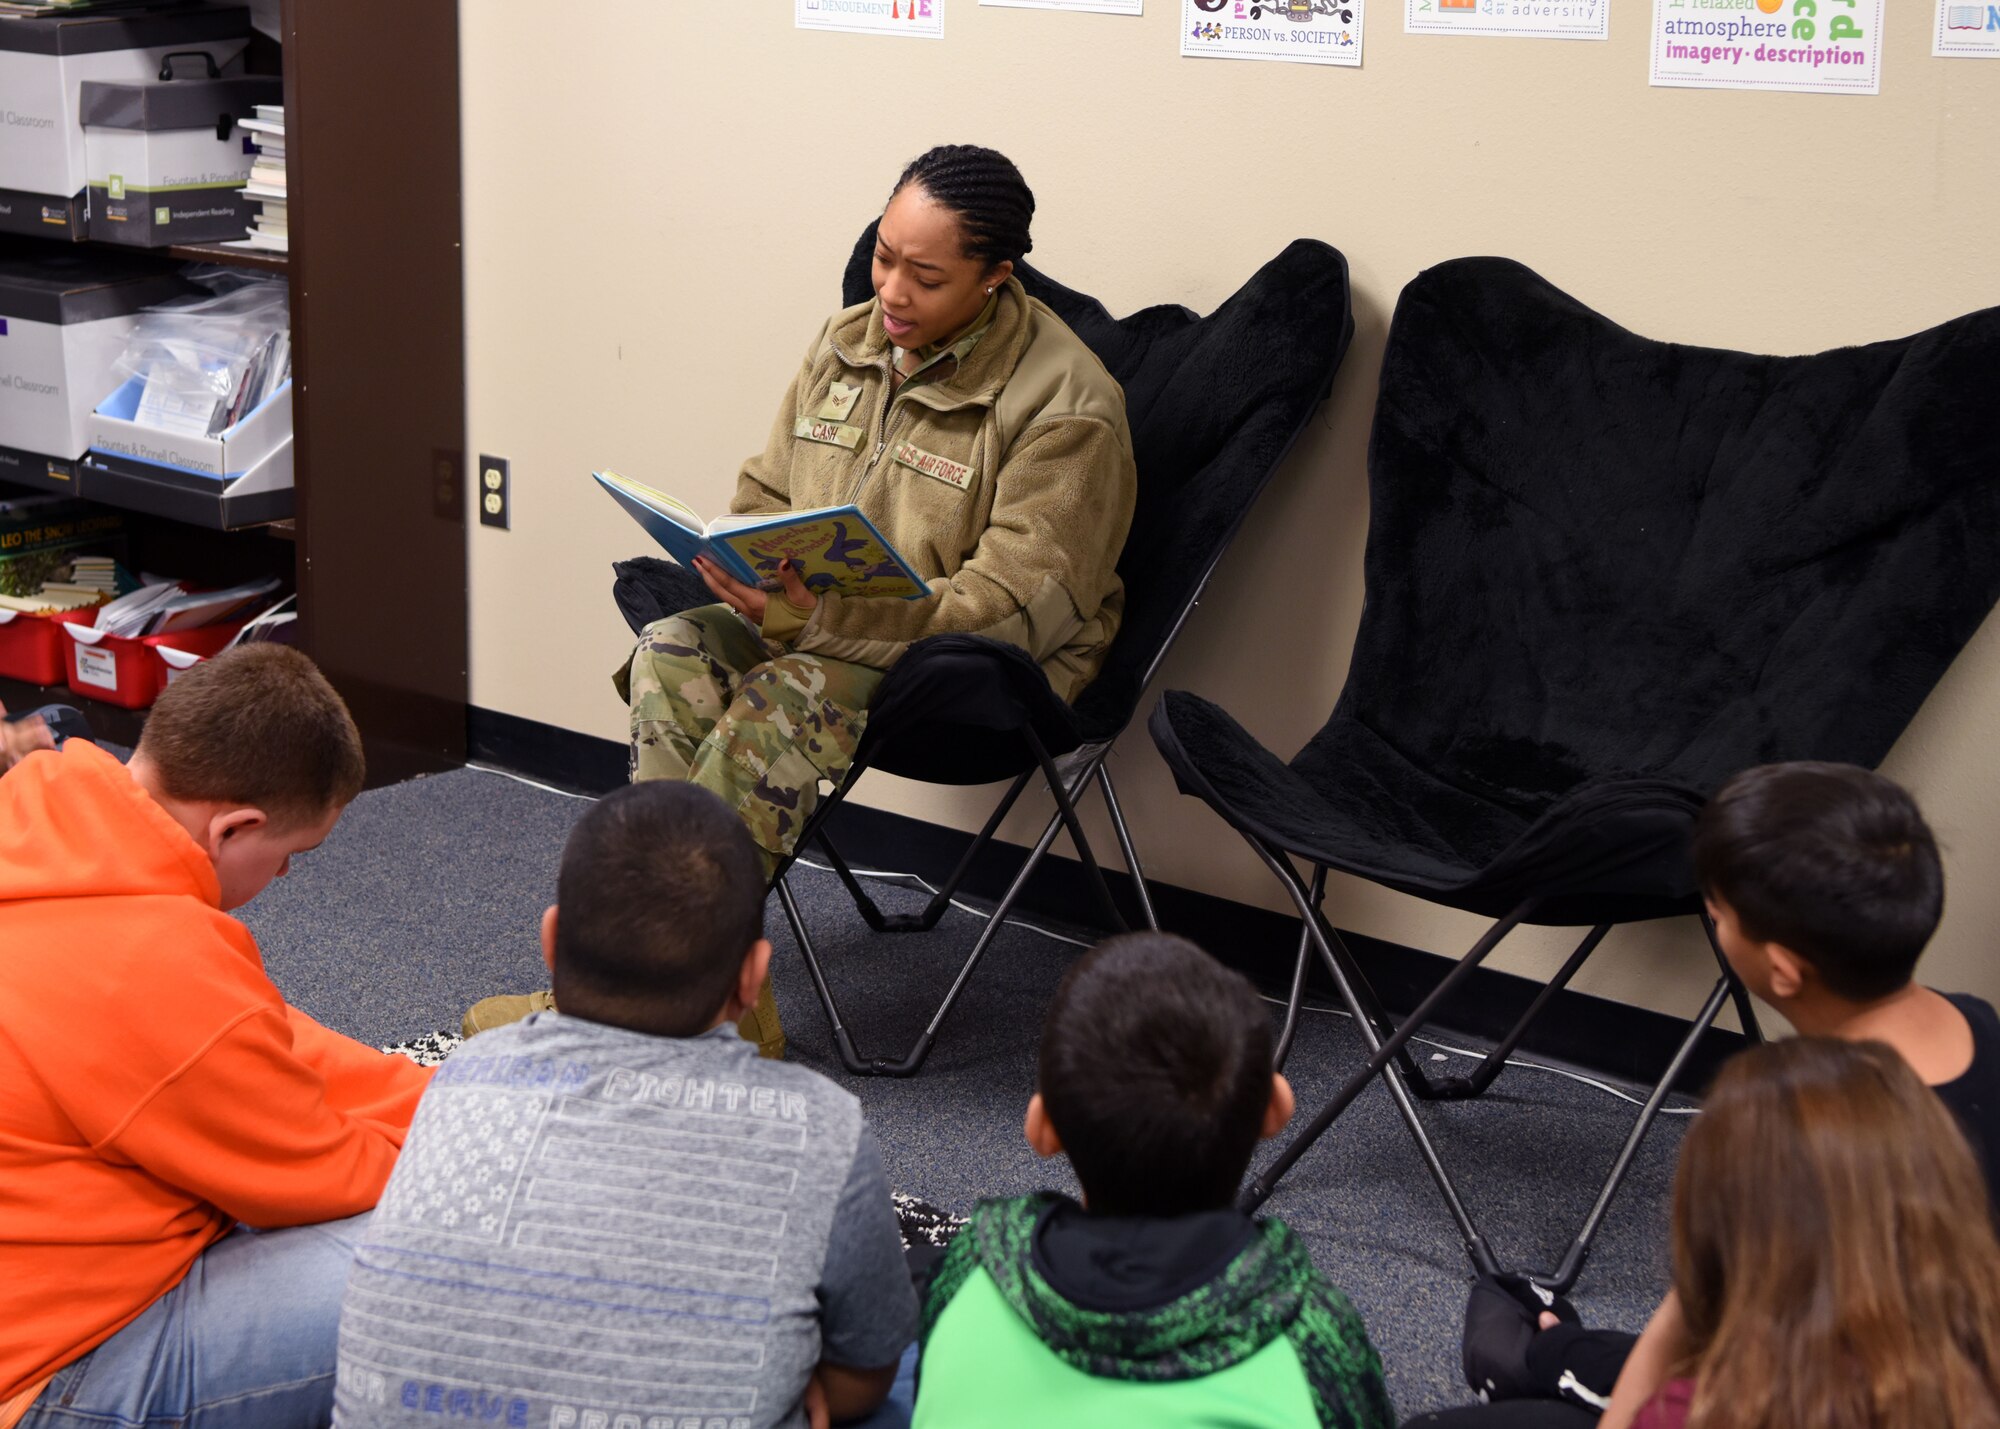 U.S. Air Force Senior Airman Brianna Cash, 17th Comptroller Squadron financial analyst, reads “Hunches in Bunches” to a fifth grade class at McGill Elementary School in San Angelo, Texas, Feb. 27, 2020. Cash was one of 39 volunteers who read to and interacted with the students. (U.S. Air Force photo by Airman 1st Class Ethan Sherwood)